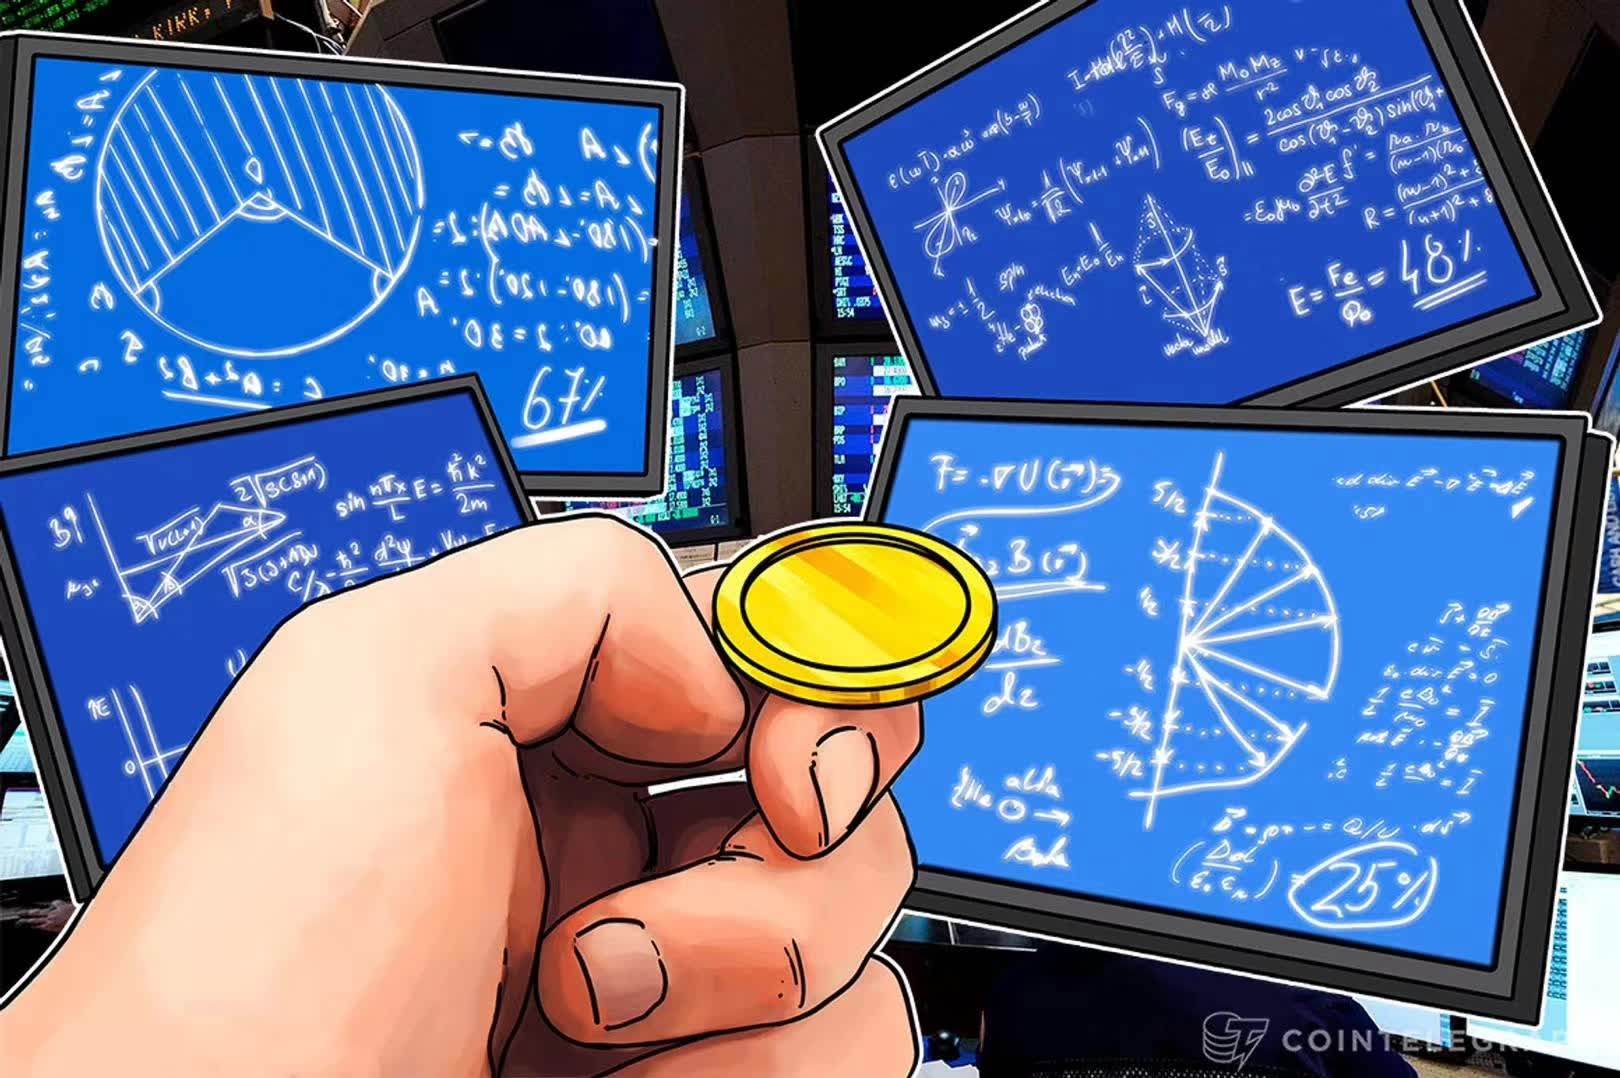 SEC raises concerns over Coinbases role in proposed Celsius plan